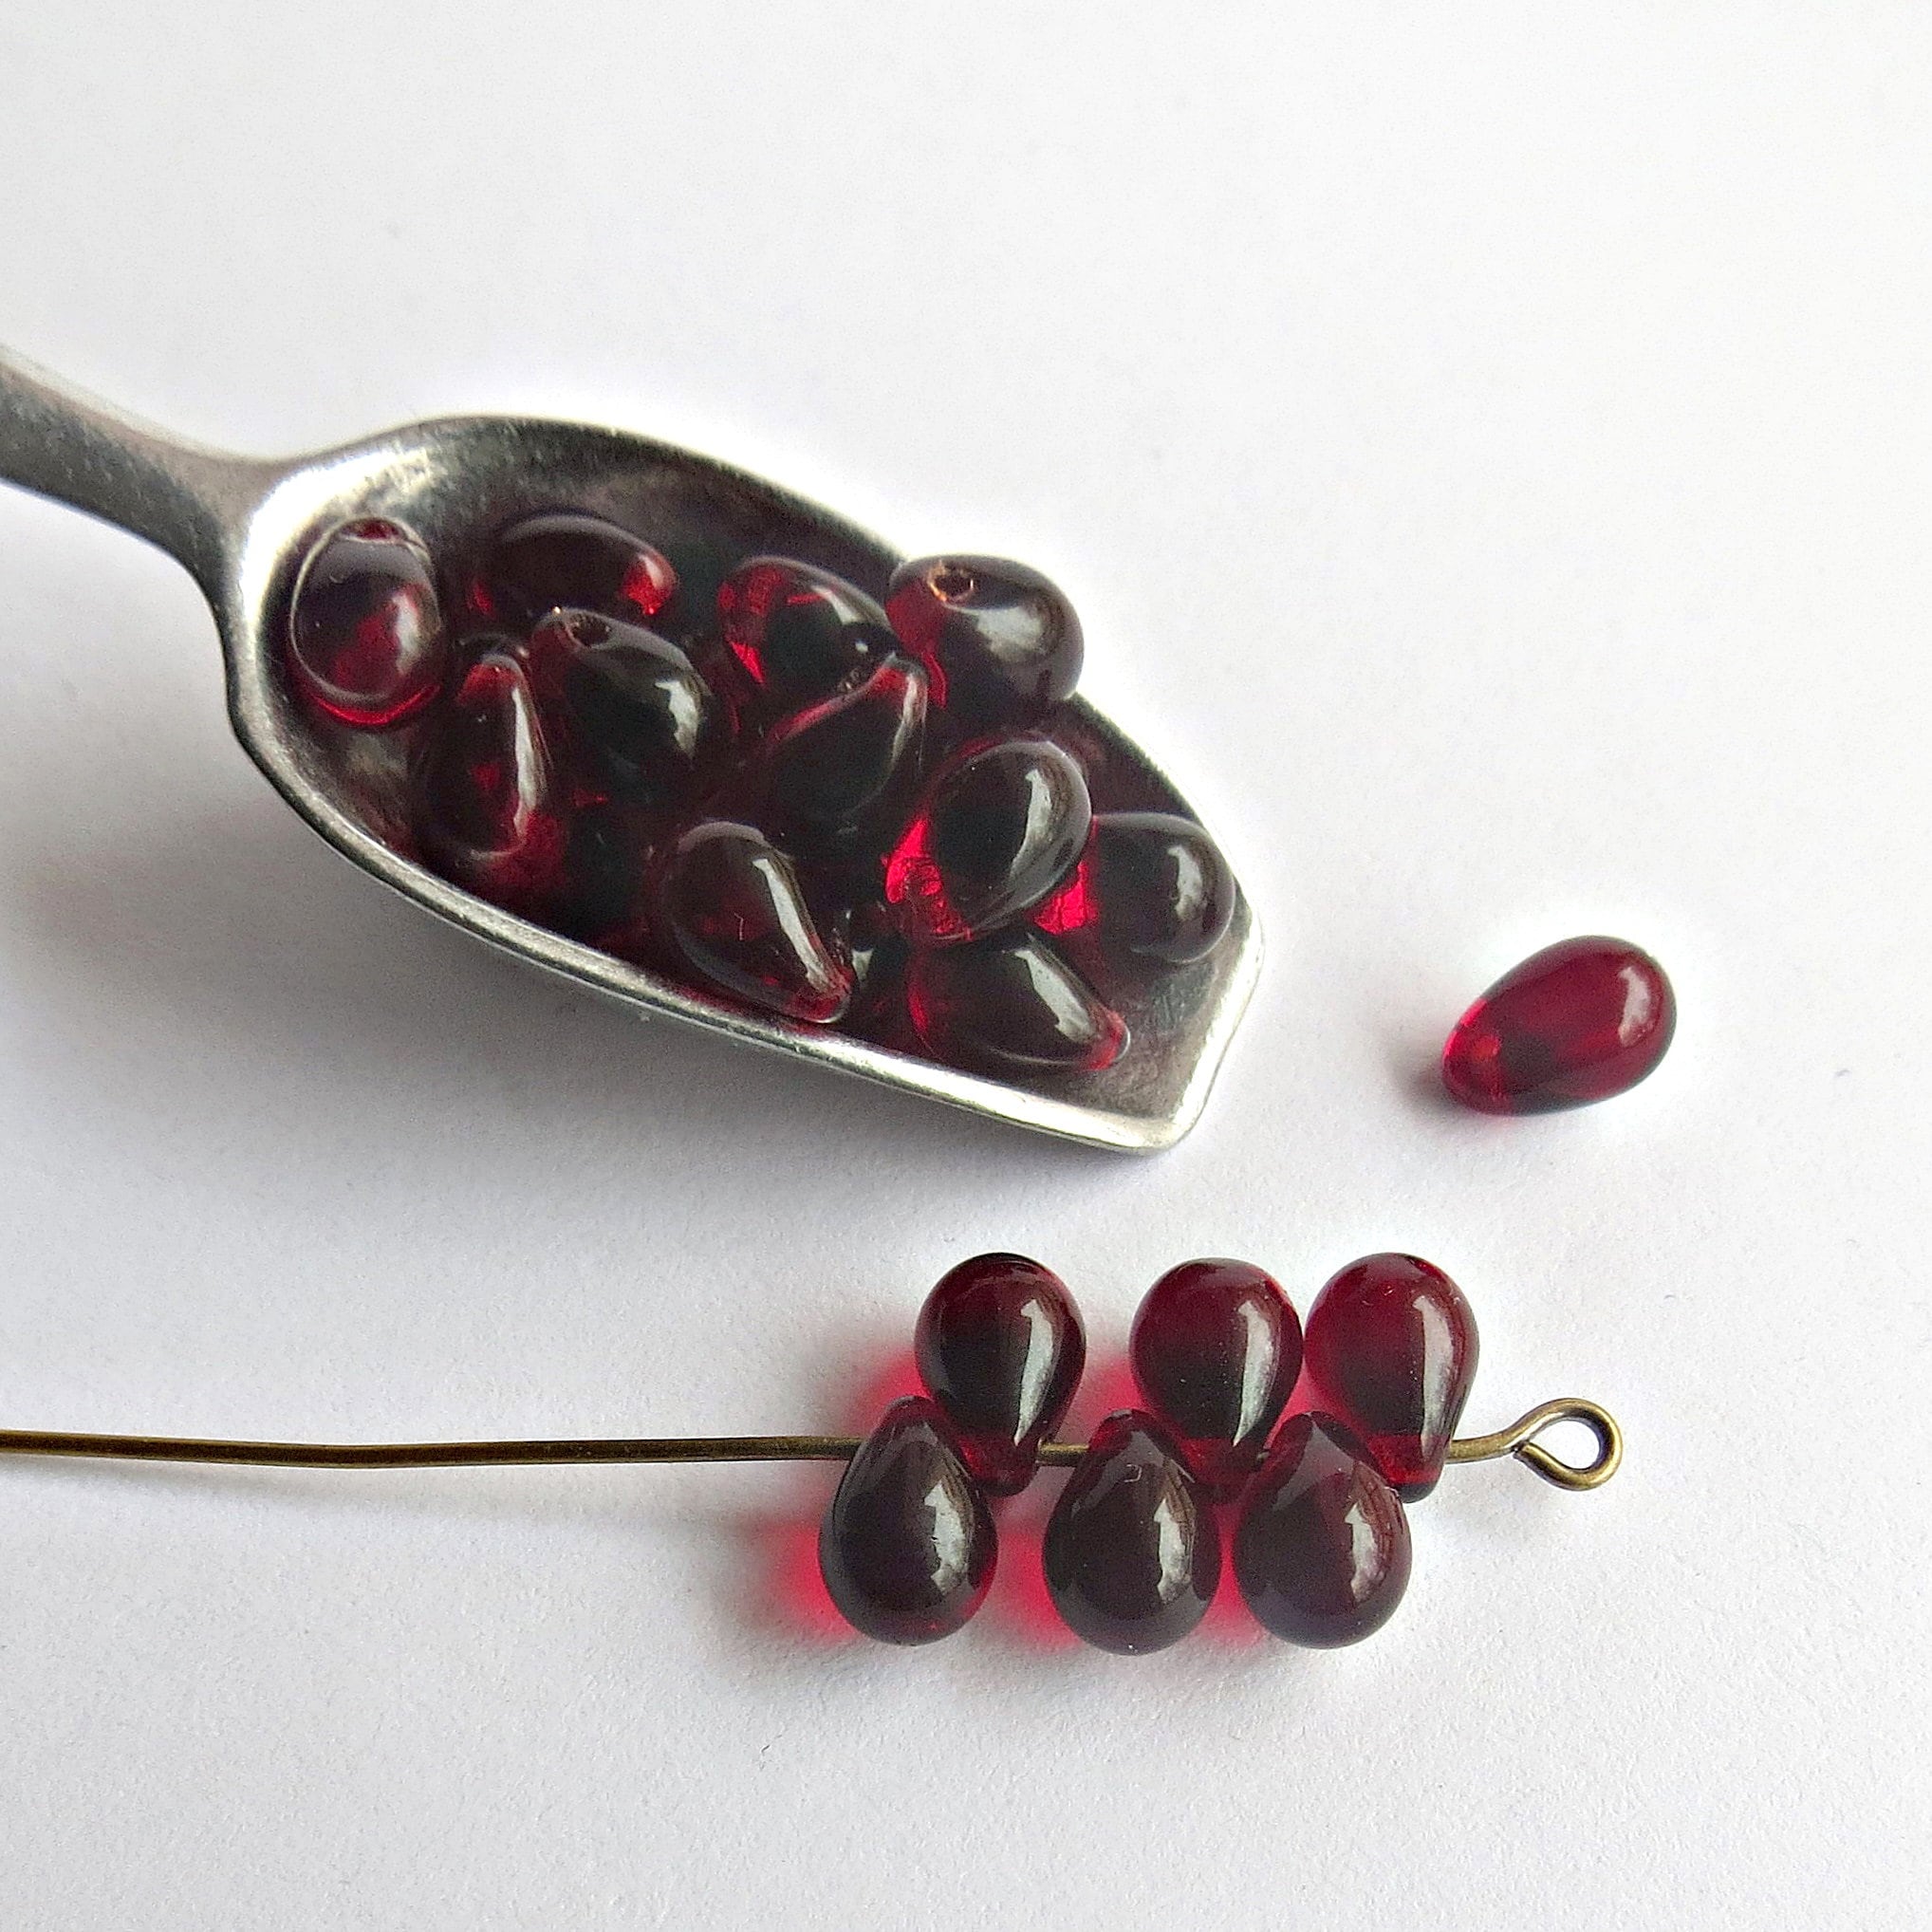 Ten large Czech glass teardrop beads - 9 x 18mm transparent Siam red  pressed glass side drilled faceted drops six sides C0054